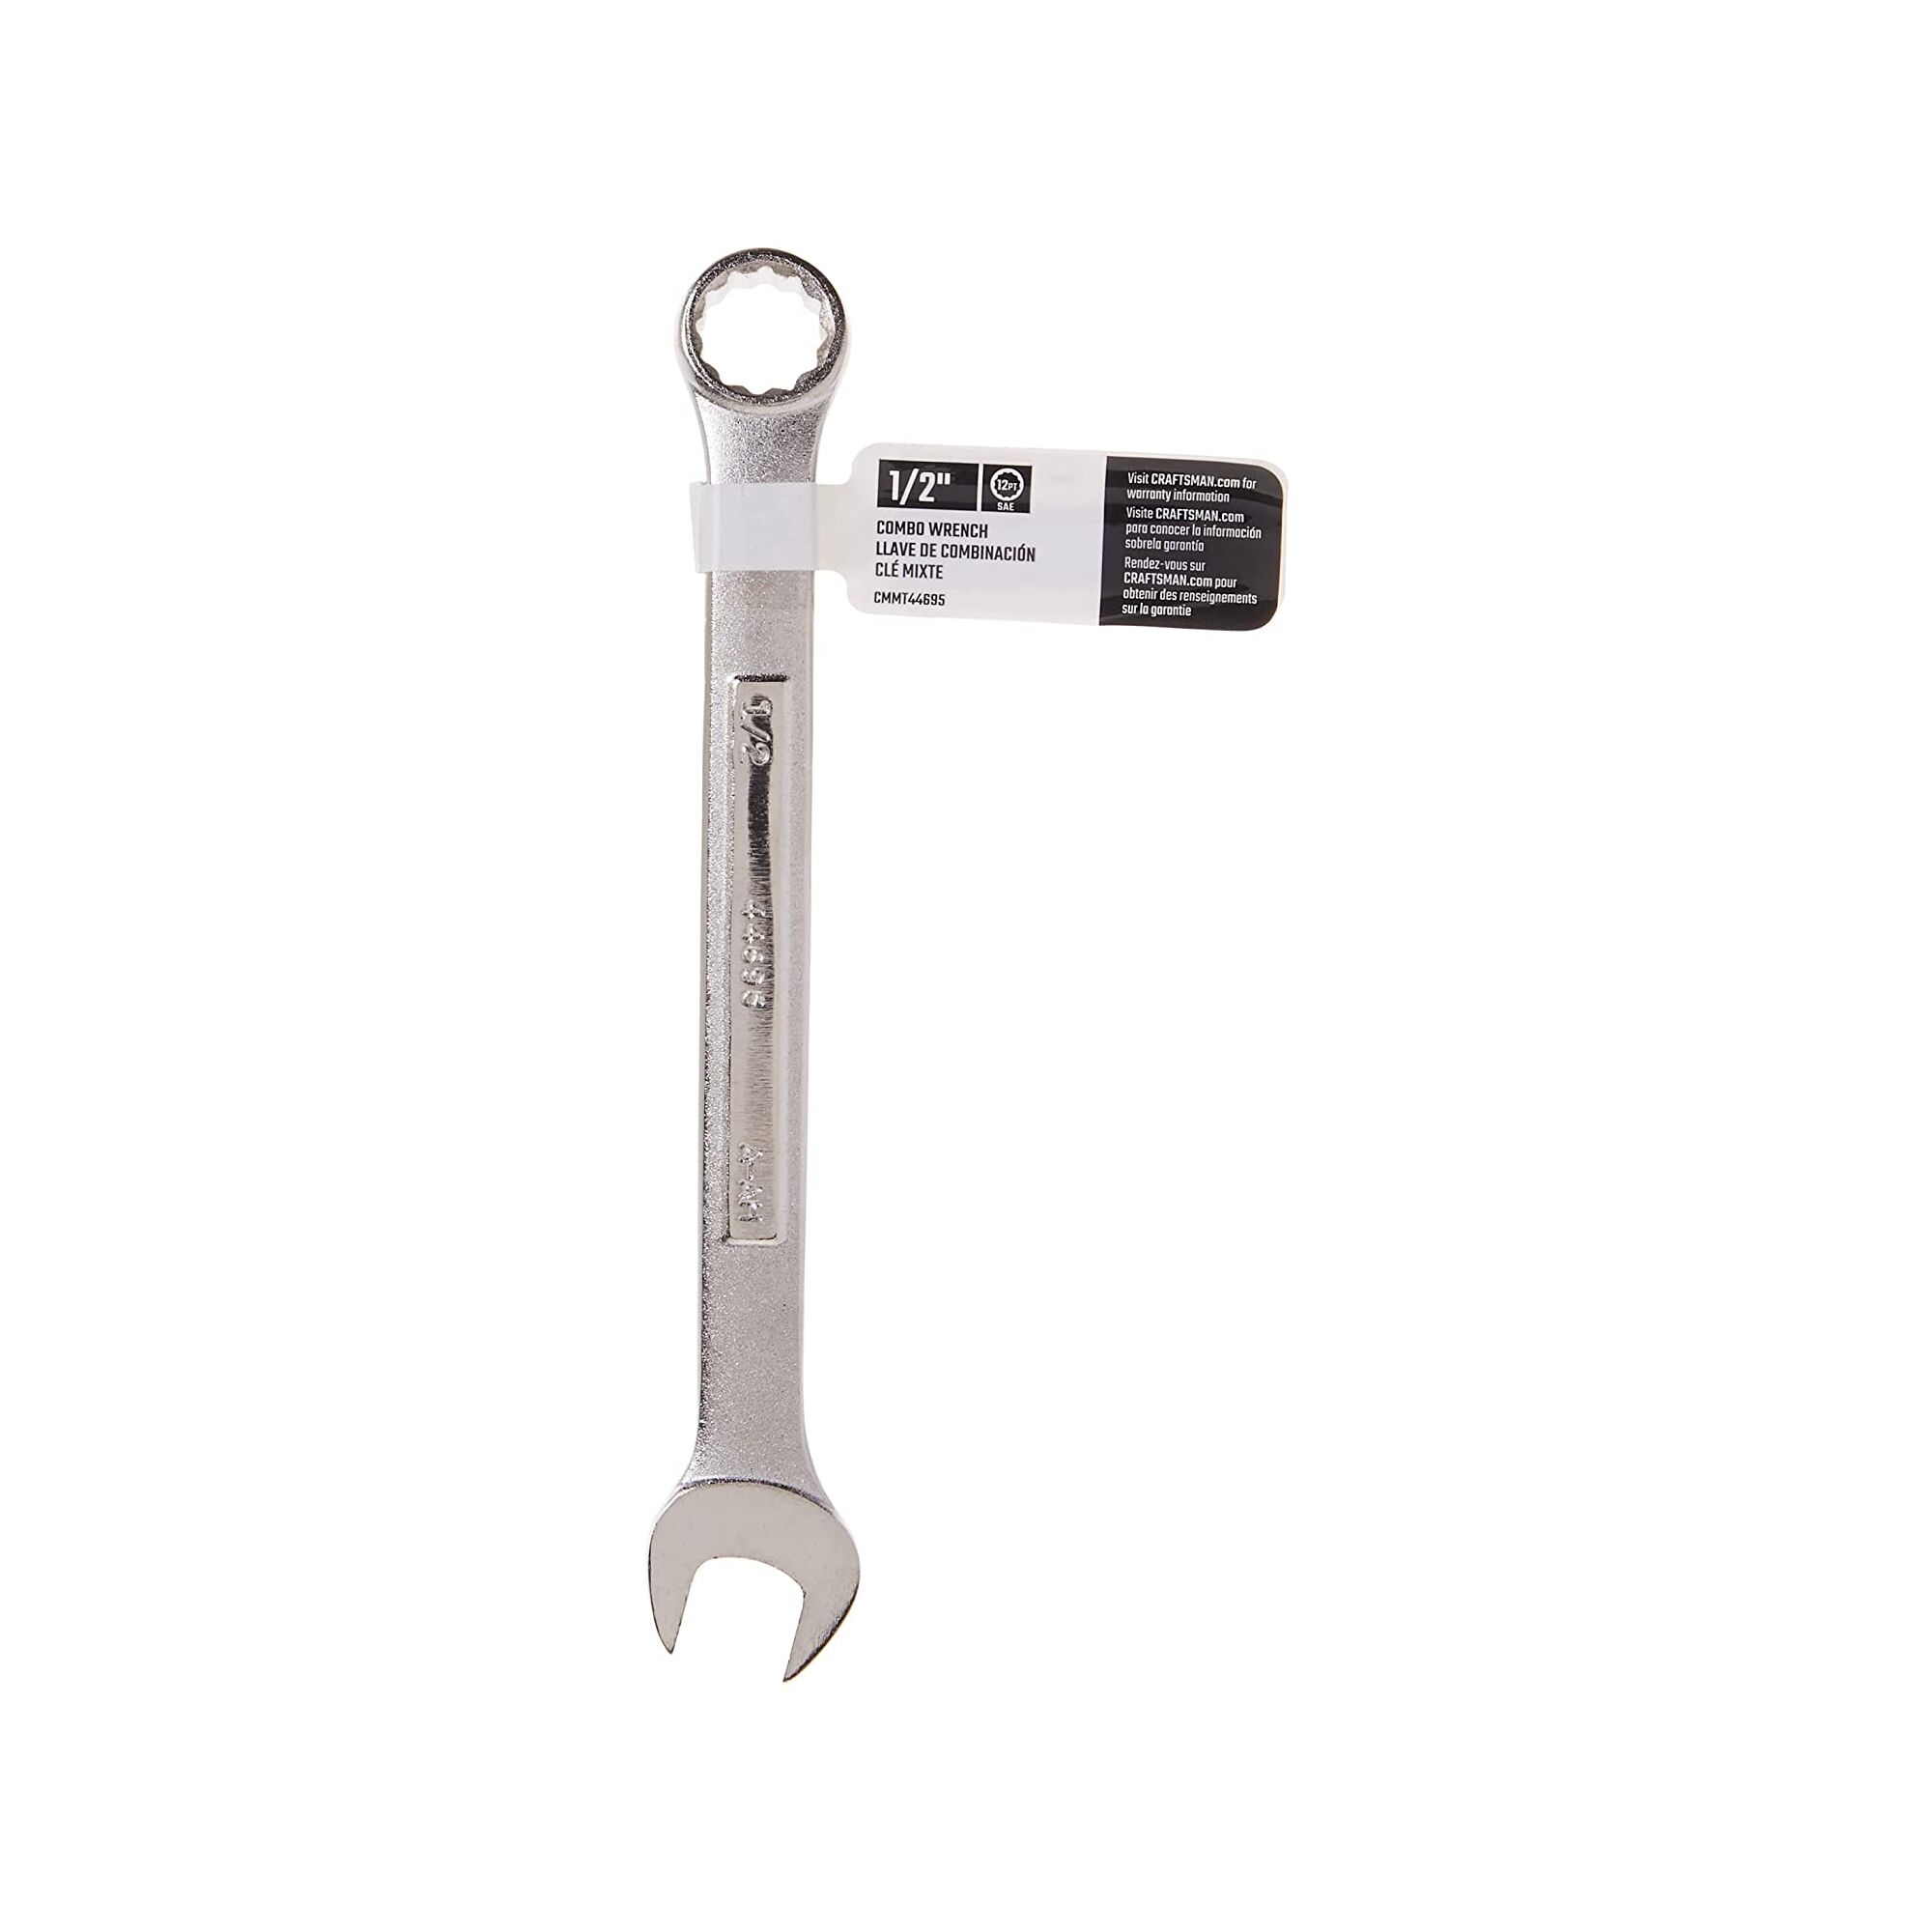 View of CRAFTSMAN Wrenches: Combination packaging